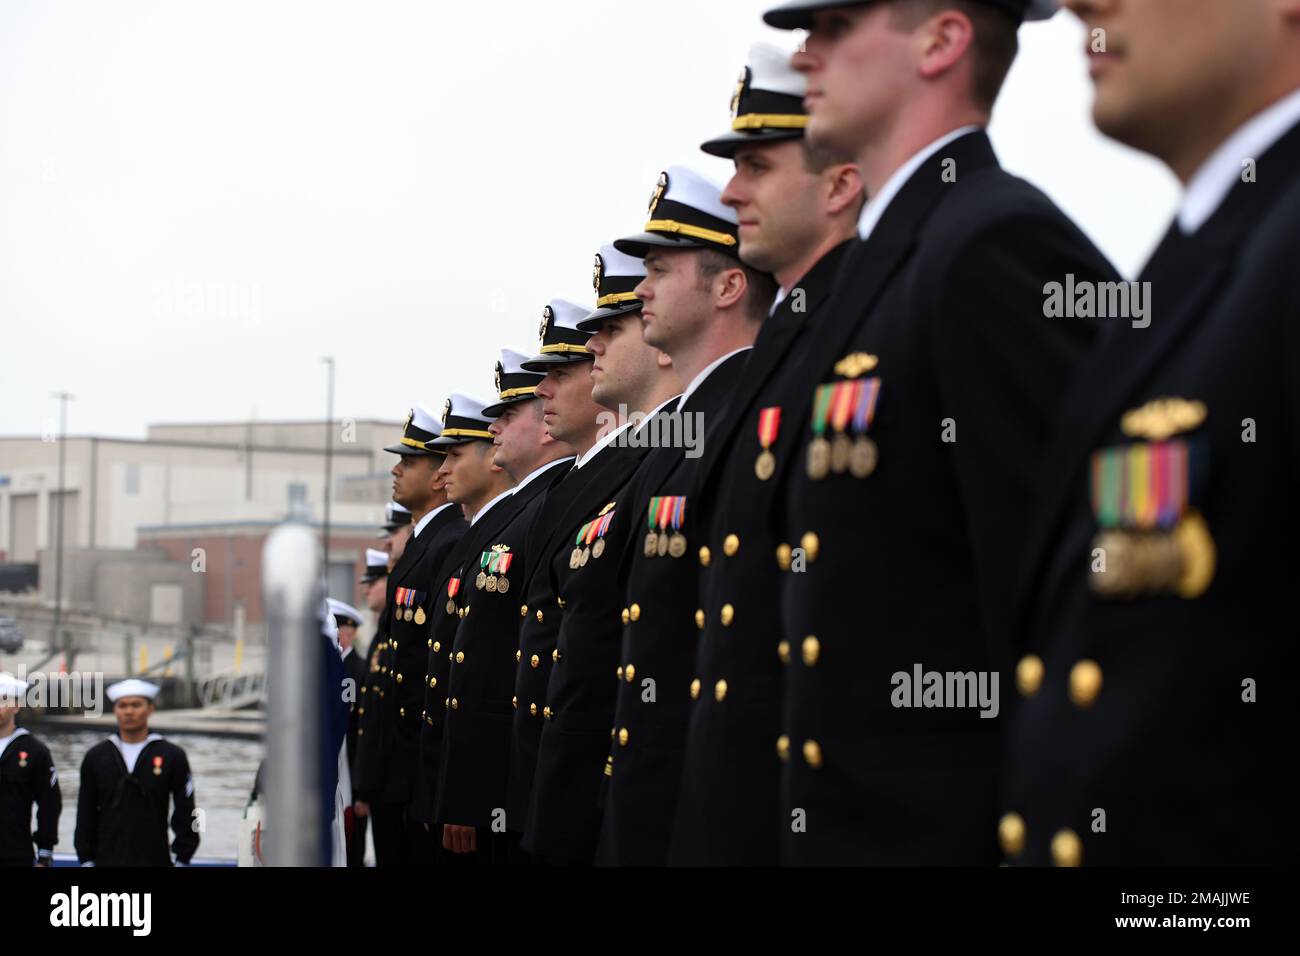 220528-N-GR655-0164 GROTON, Connecticut (May 28, 2022) – Crewmembers attached to the Virginia-class fast attack submarine USS Oregon (SSN 793) man the brow during a commissioning ceremony in Groton, Conn., May 28, 2022. SSN 793, the third U.S Navy ship launched with the name Oregon and first in more than a century, is a flexible, multi-mission platform designed to carry out the seven core competencies of the submarine force: anti-submarine warfare; anti-surface warfare; delivery of special operations forces; strike warfare; irregular warfare; intelligence, surveillance and reconnaissance; and Stock Photo